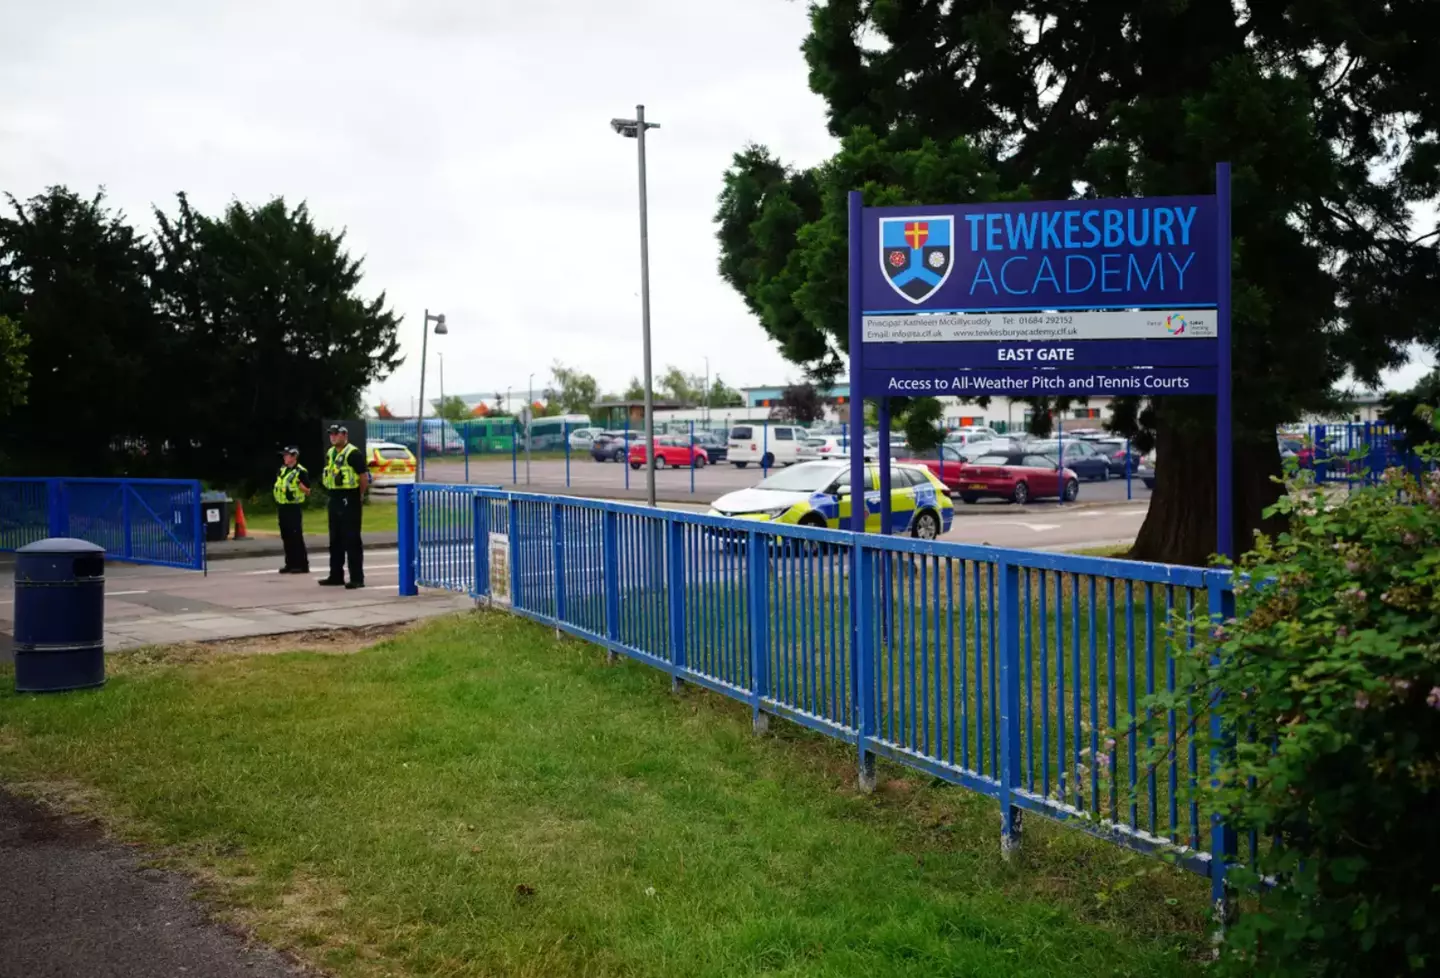 The stabbing happened at Tewkesbury Academy on Monday, 10 July.